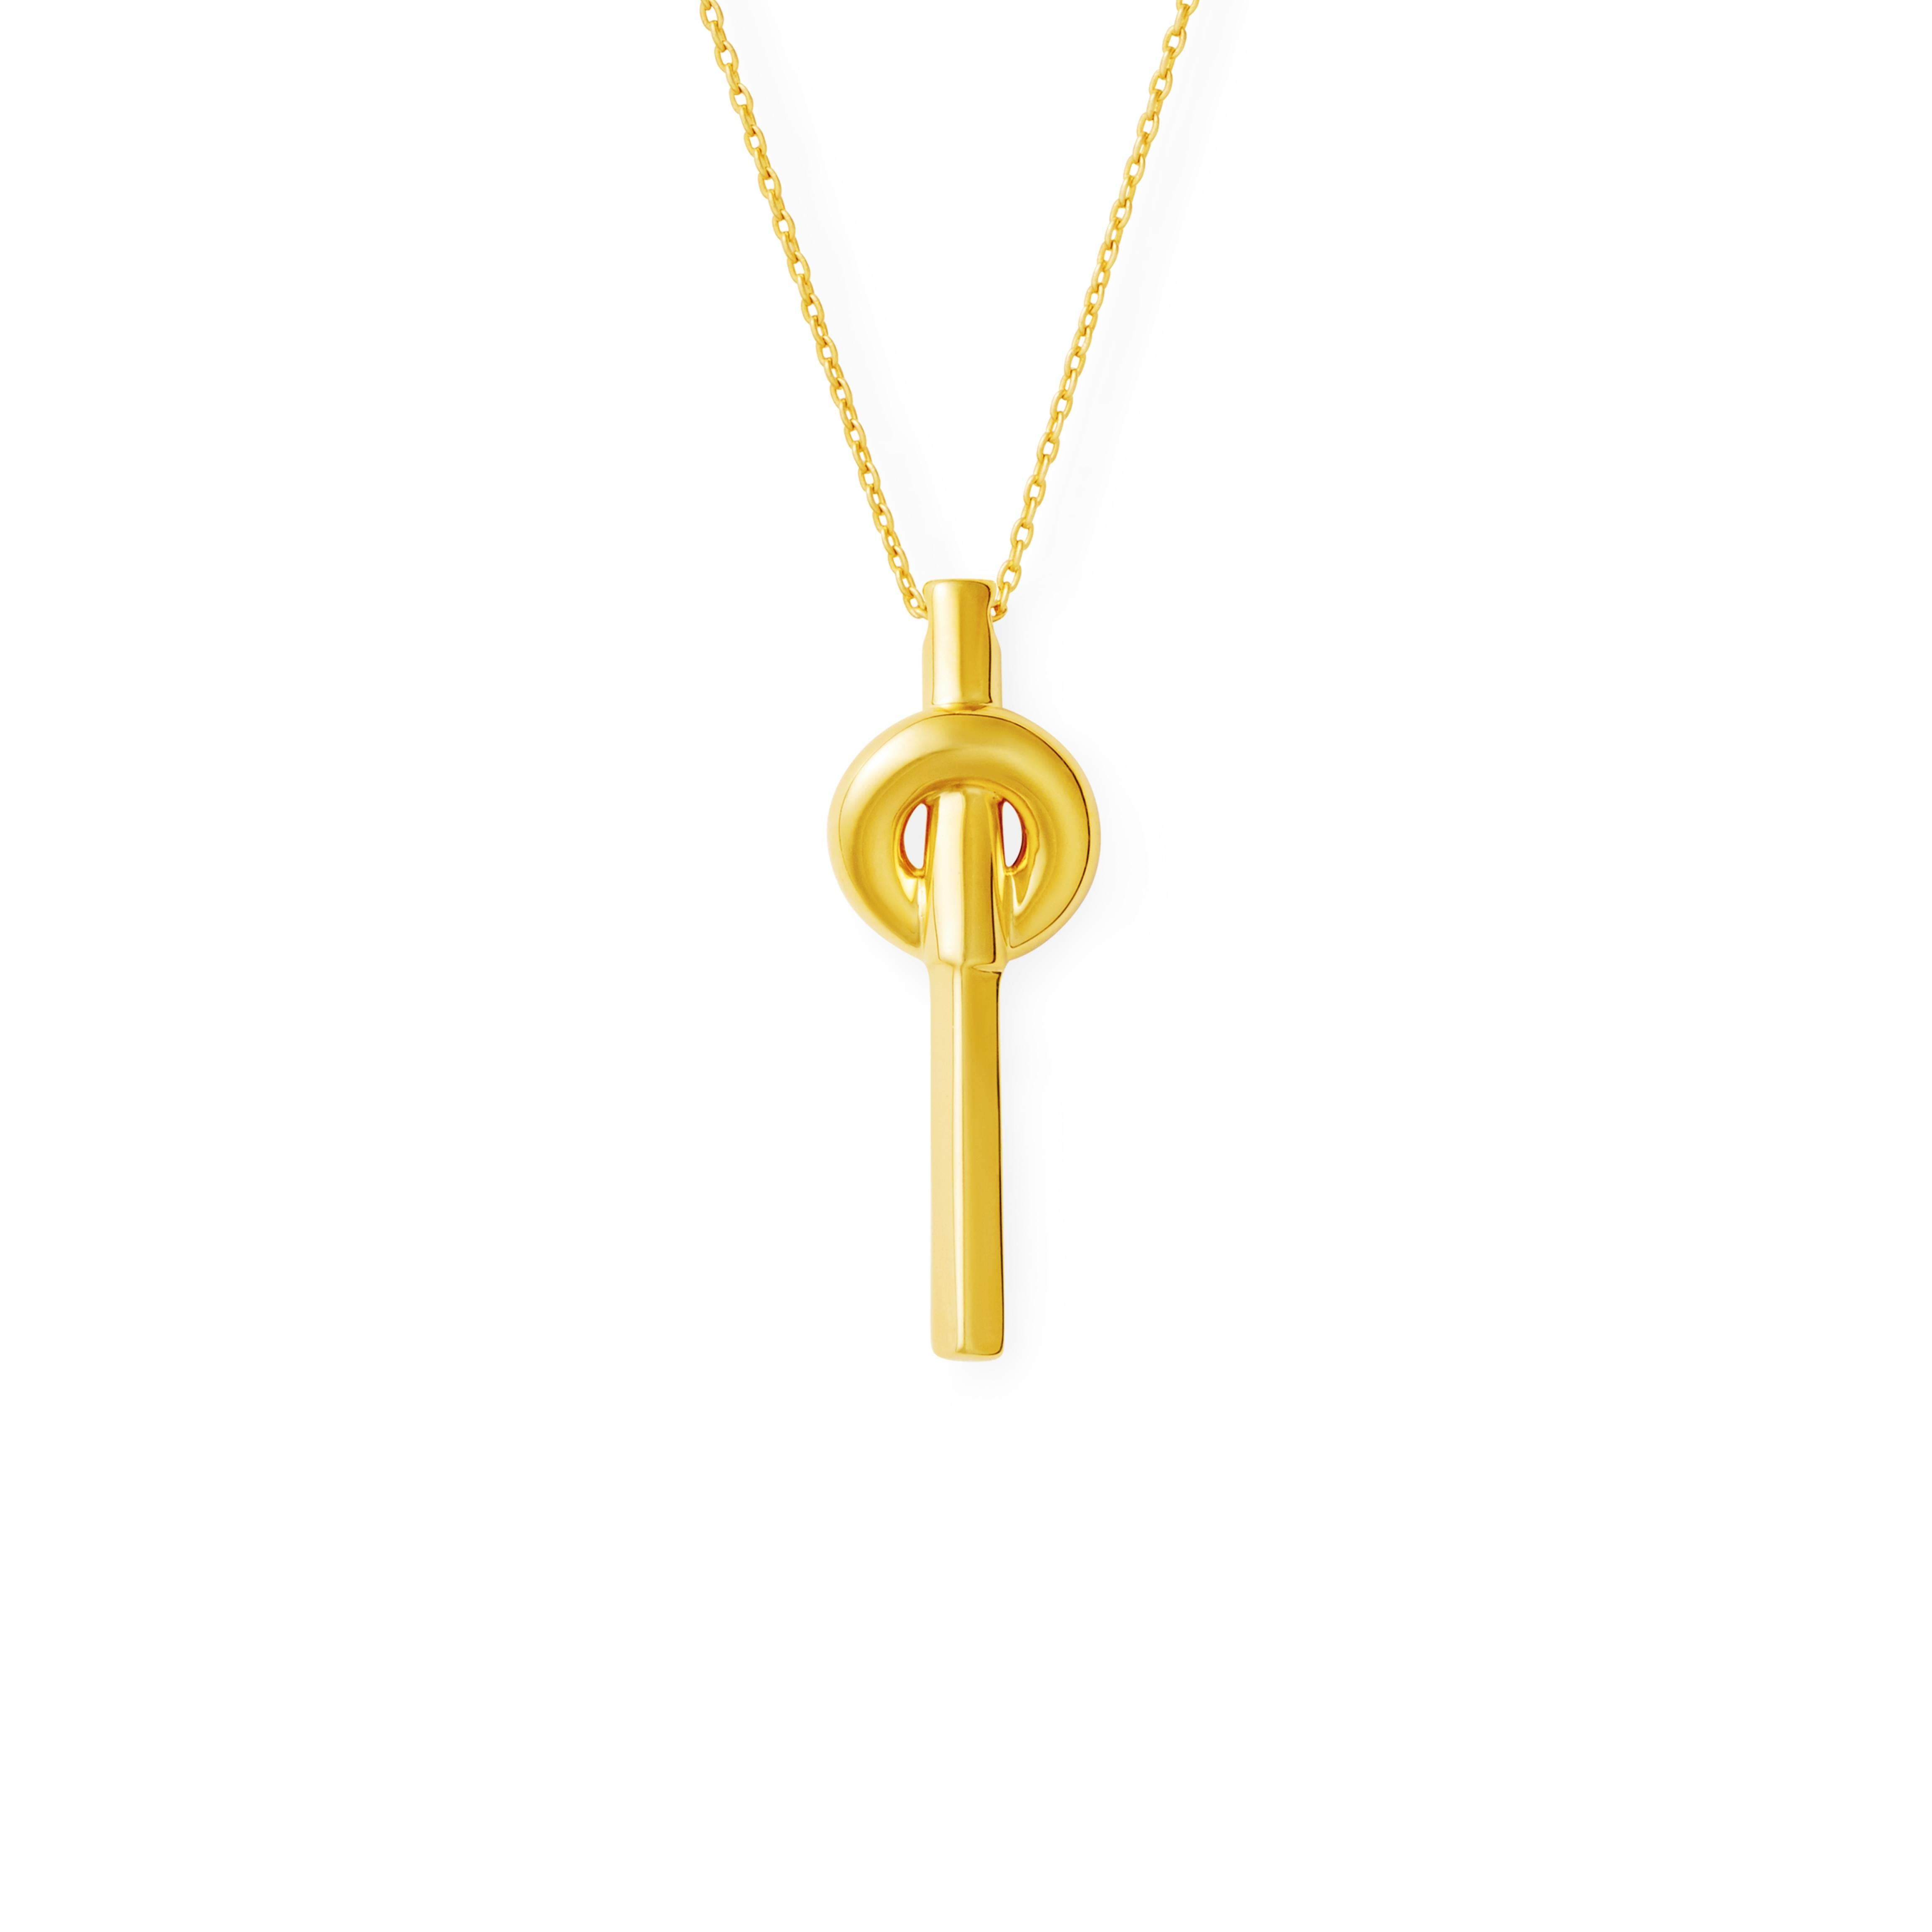 Mistova's Cut Through necklace is made from highest quality 18k Gold. A bold and sleek design perfect for everyday wear. 